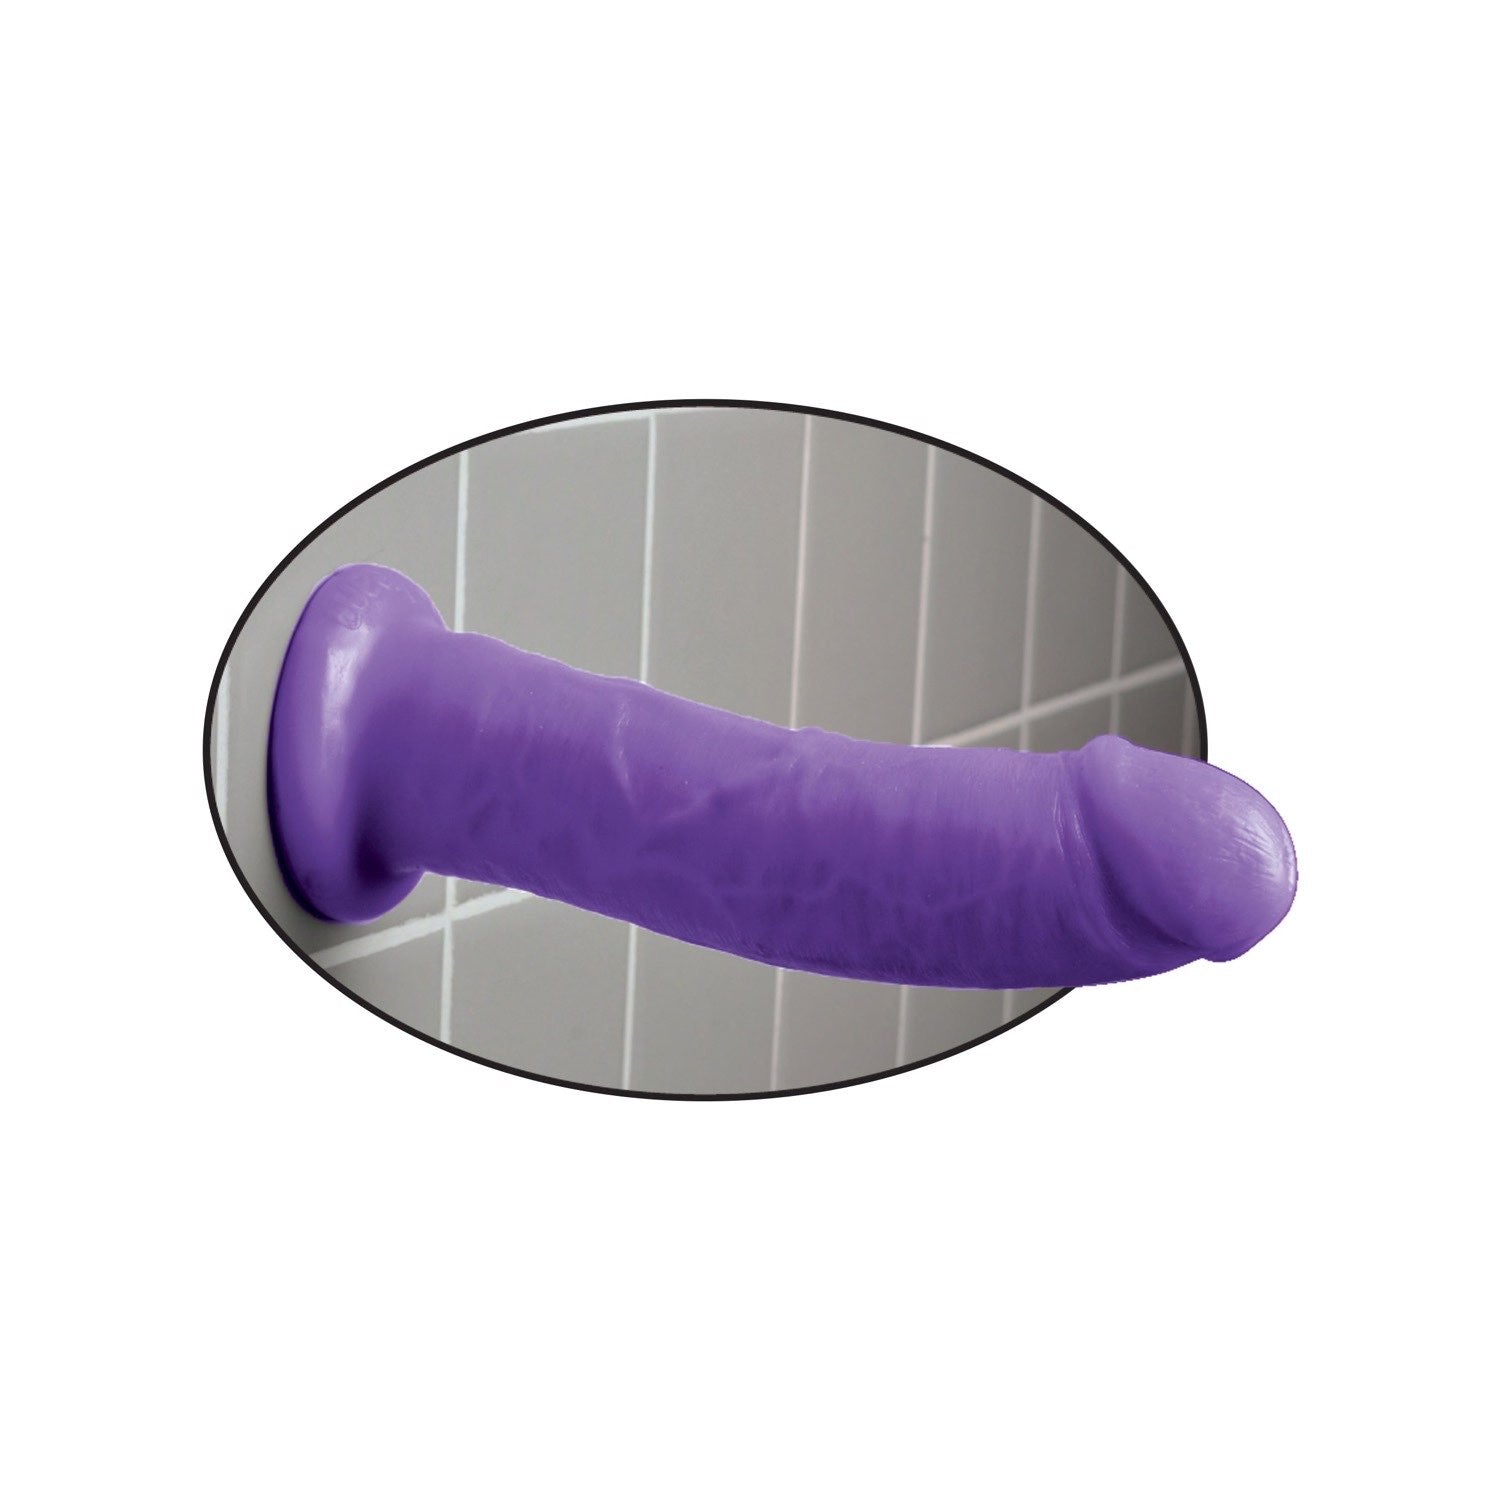 Dillio 8&quot; Dildo - Purple 20.3 cm Dong by Pipedream